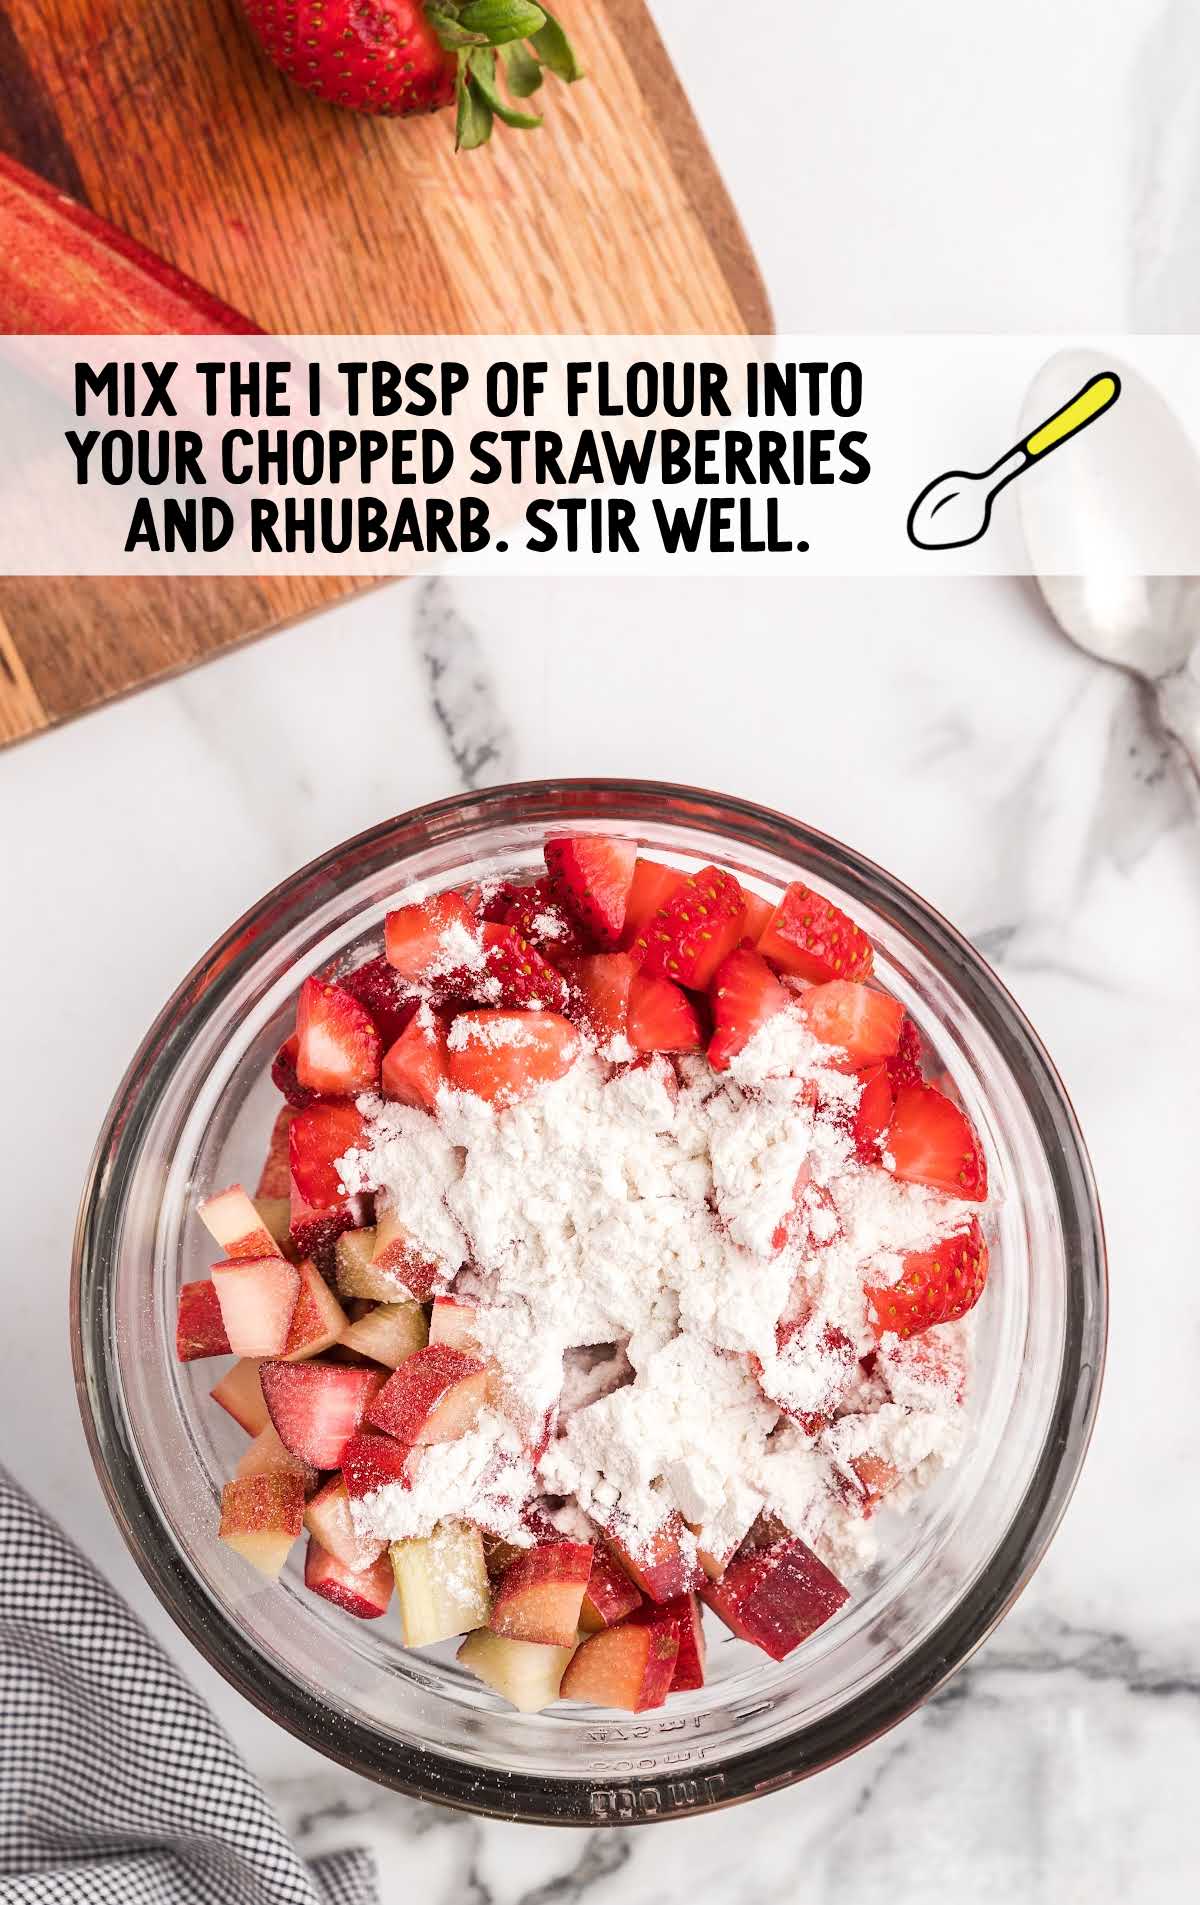 chopped strawberries and rhubarb mixed together with flour in a bowl